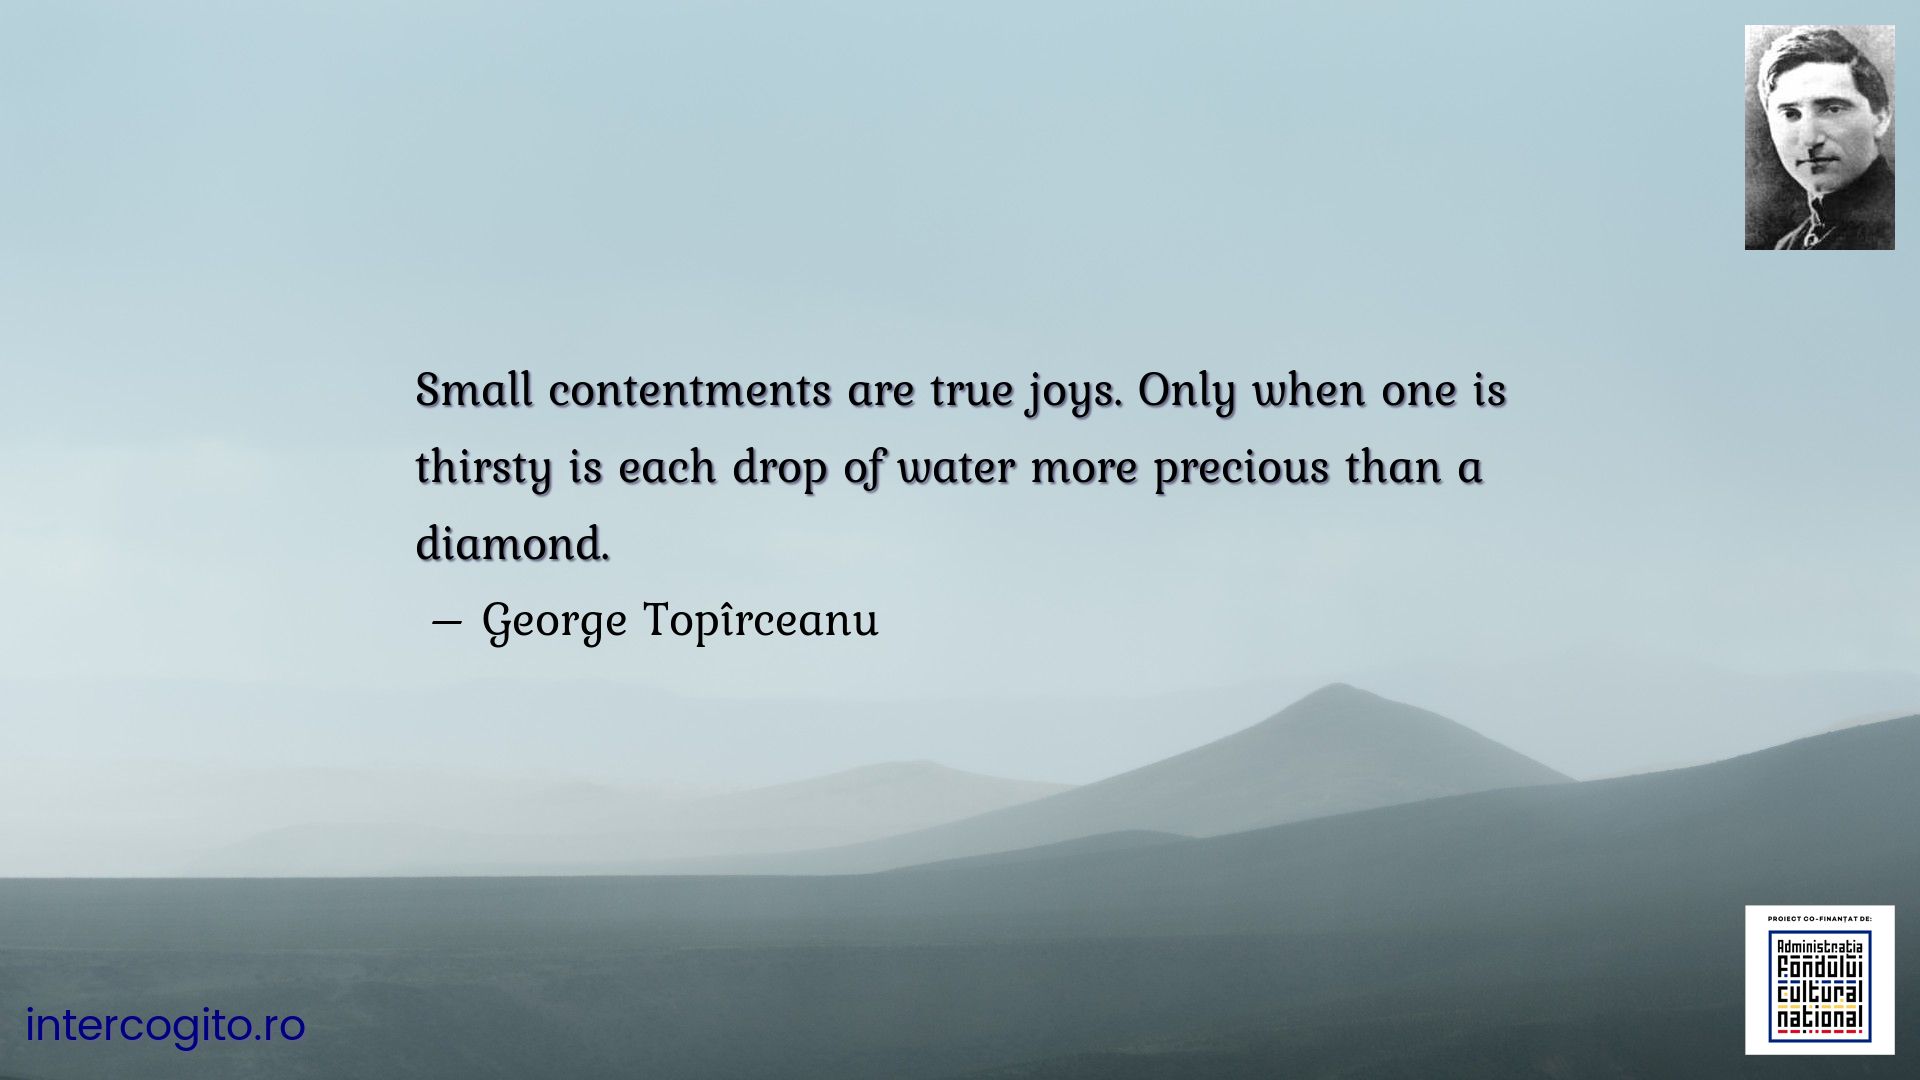 Small contentments are true joys. Only when one is thirsty is each drop of water more precious than a diamond.